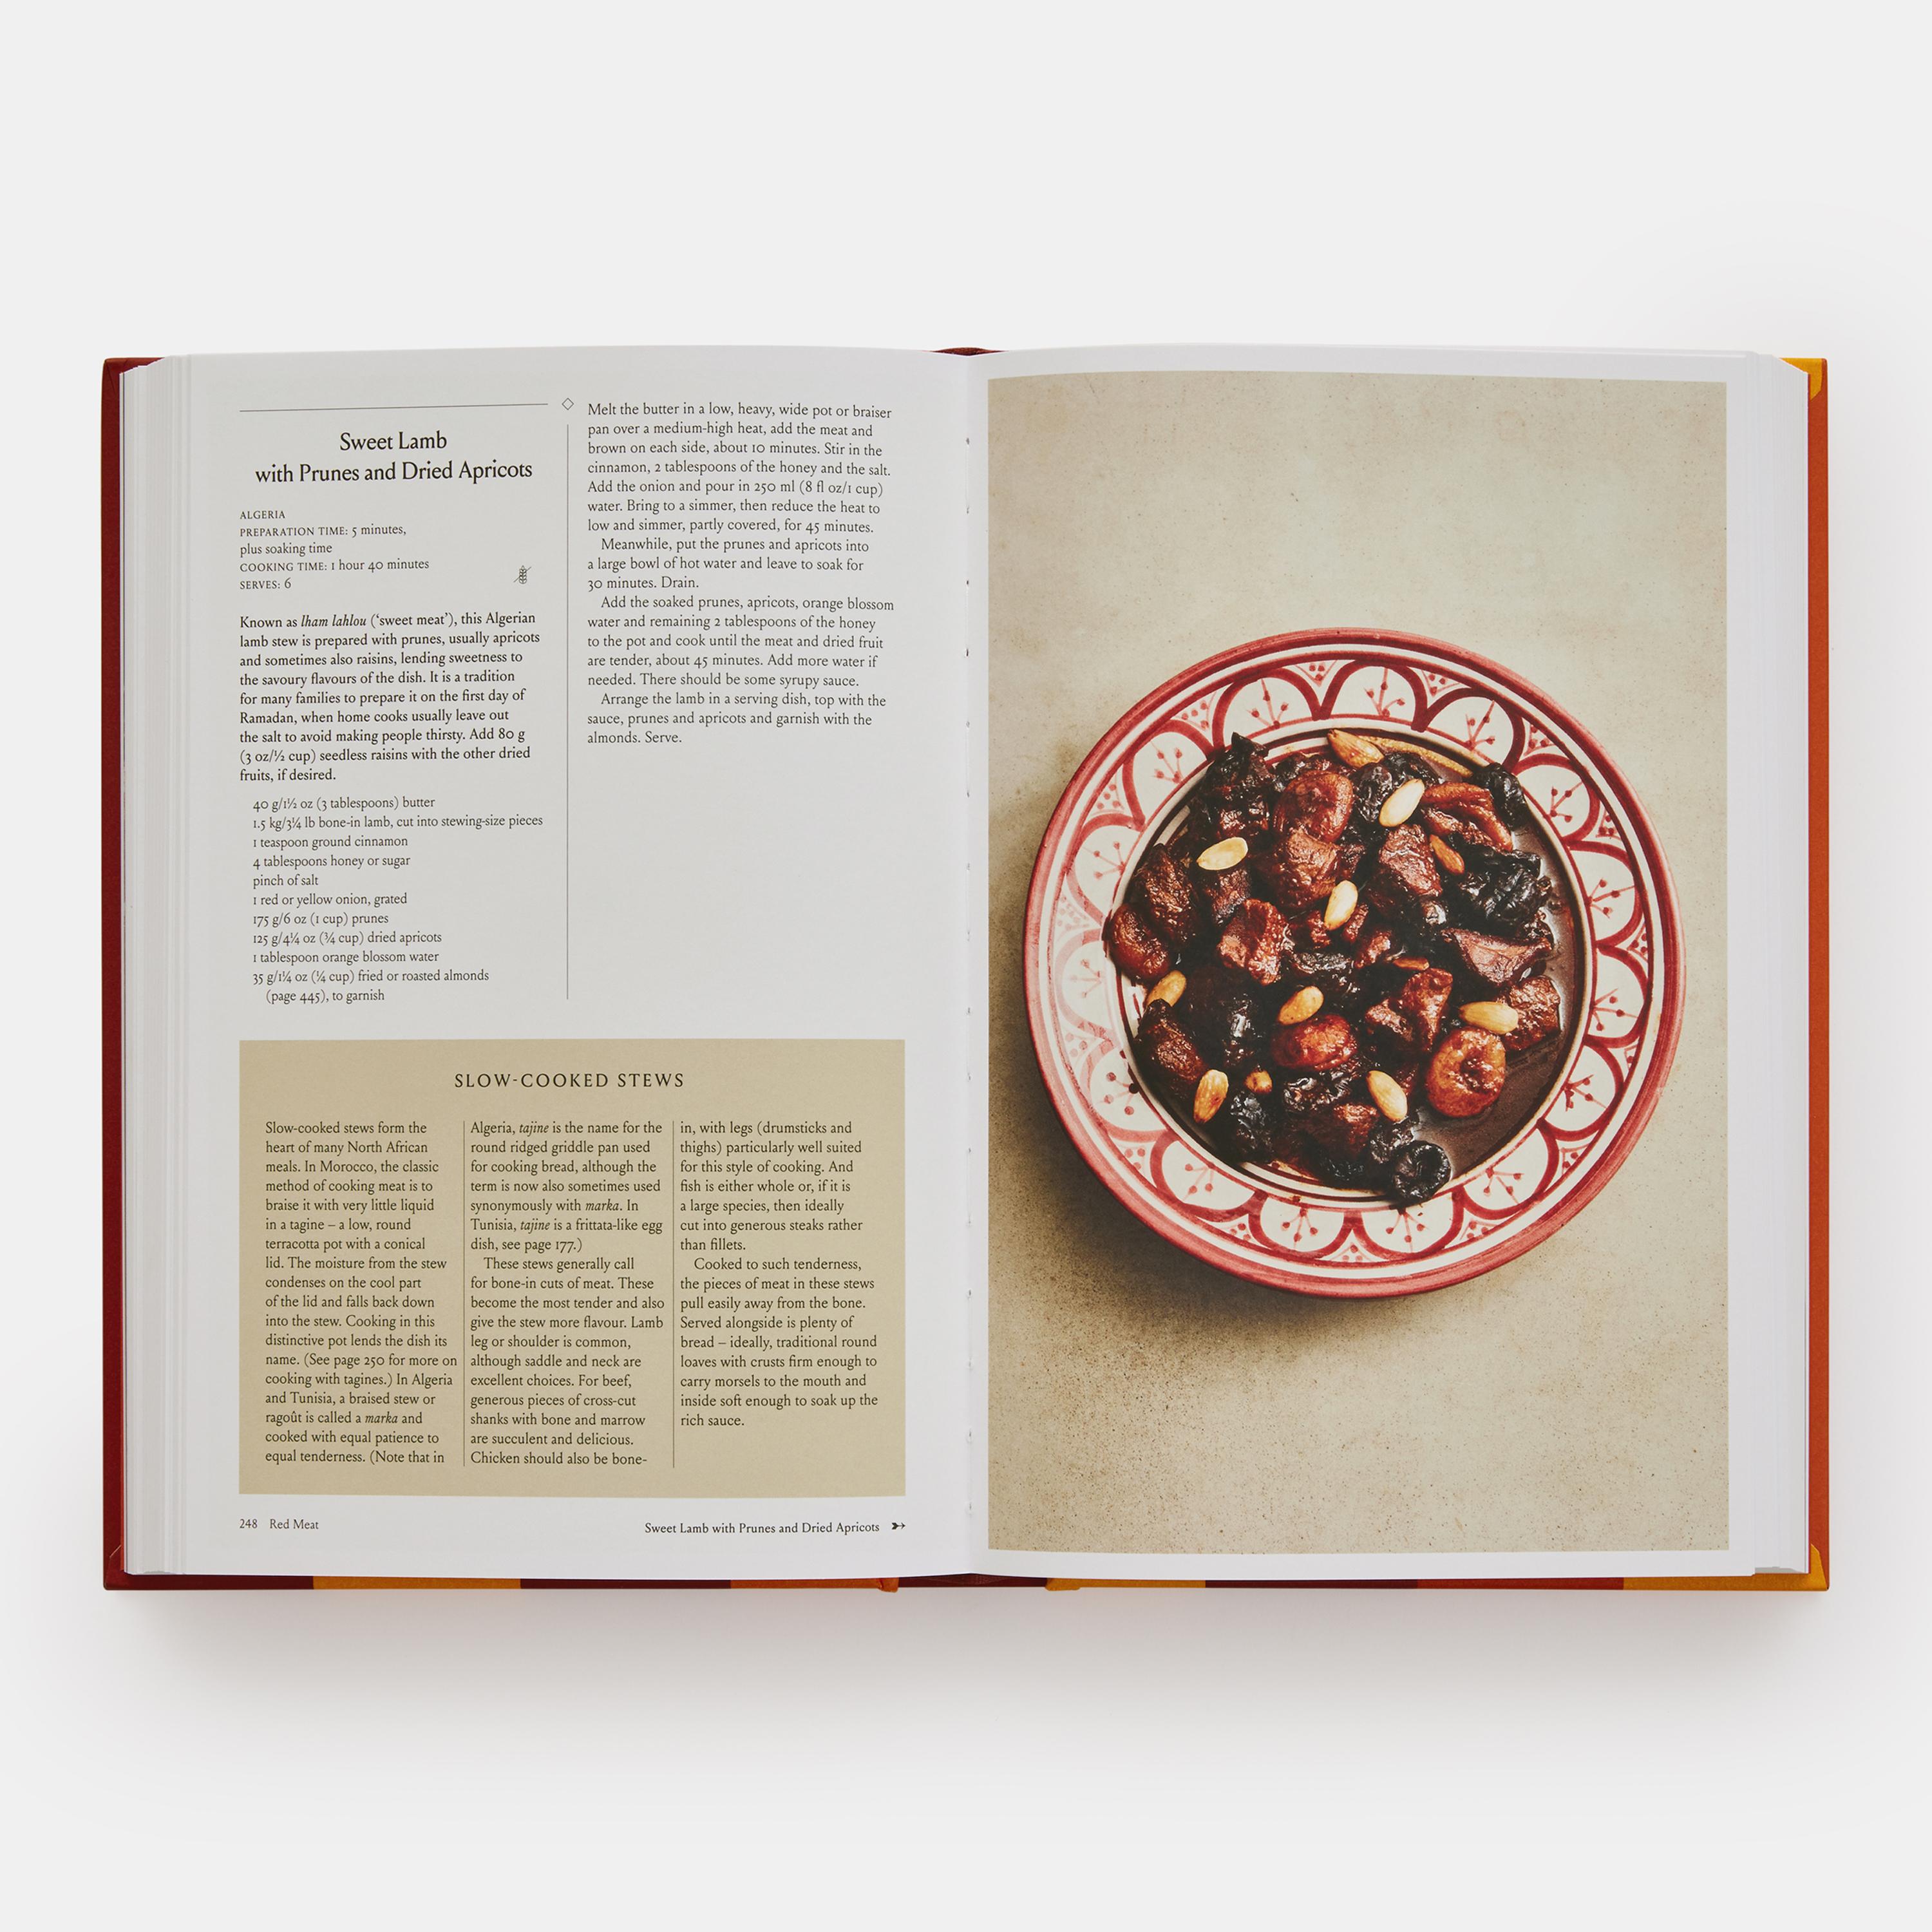 ‘This cookbook is a must for a deep dive into North African classic and regional dishes.’ – Warda Bouguettaya, James Beard award-winning pastry chef and owner of Warda Patisserie, Detroit

‘An unprecedented and remarkable dive in the fabulously